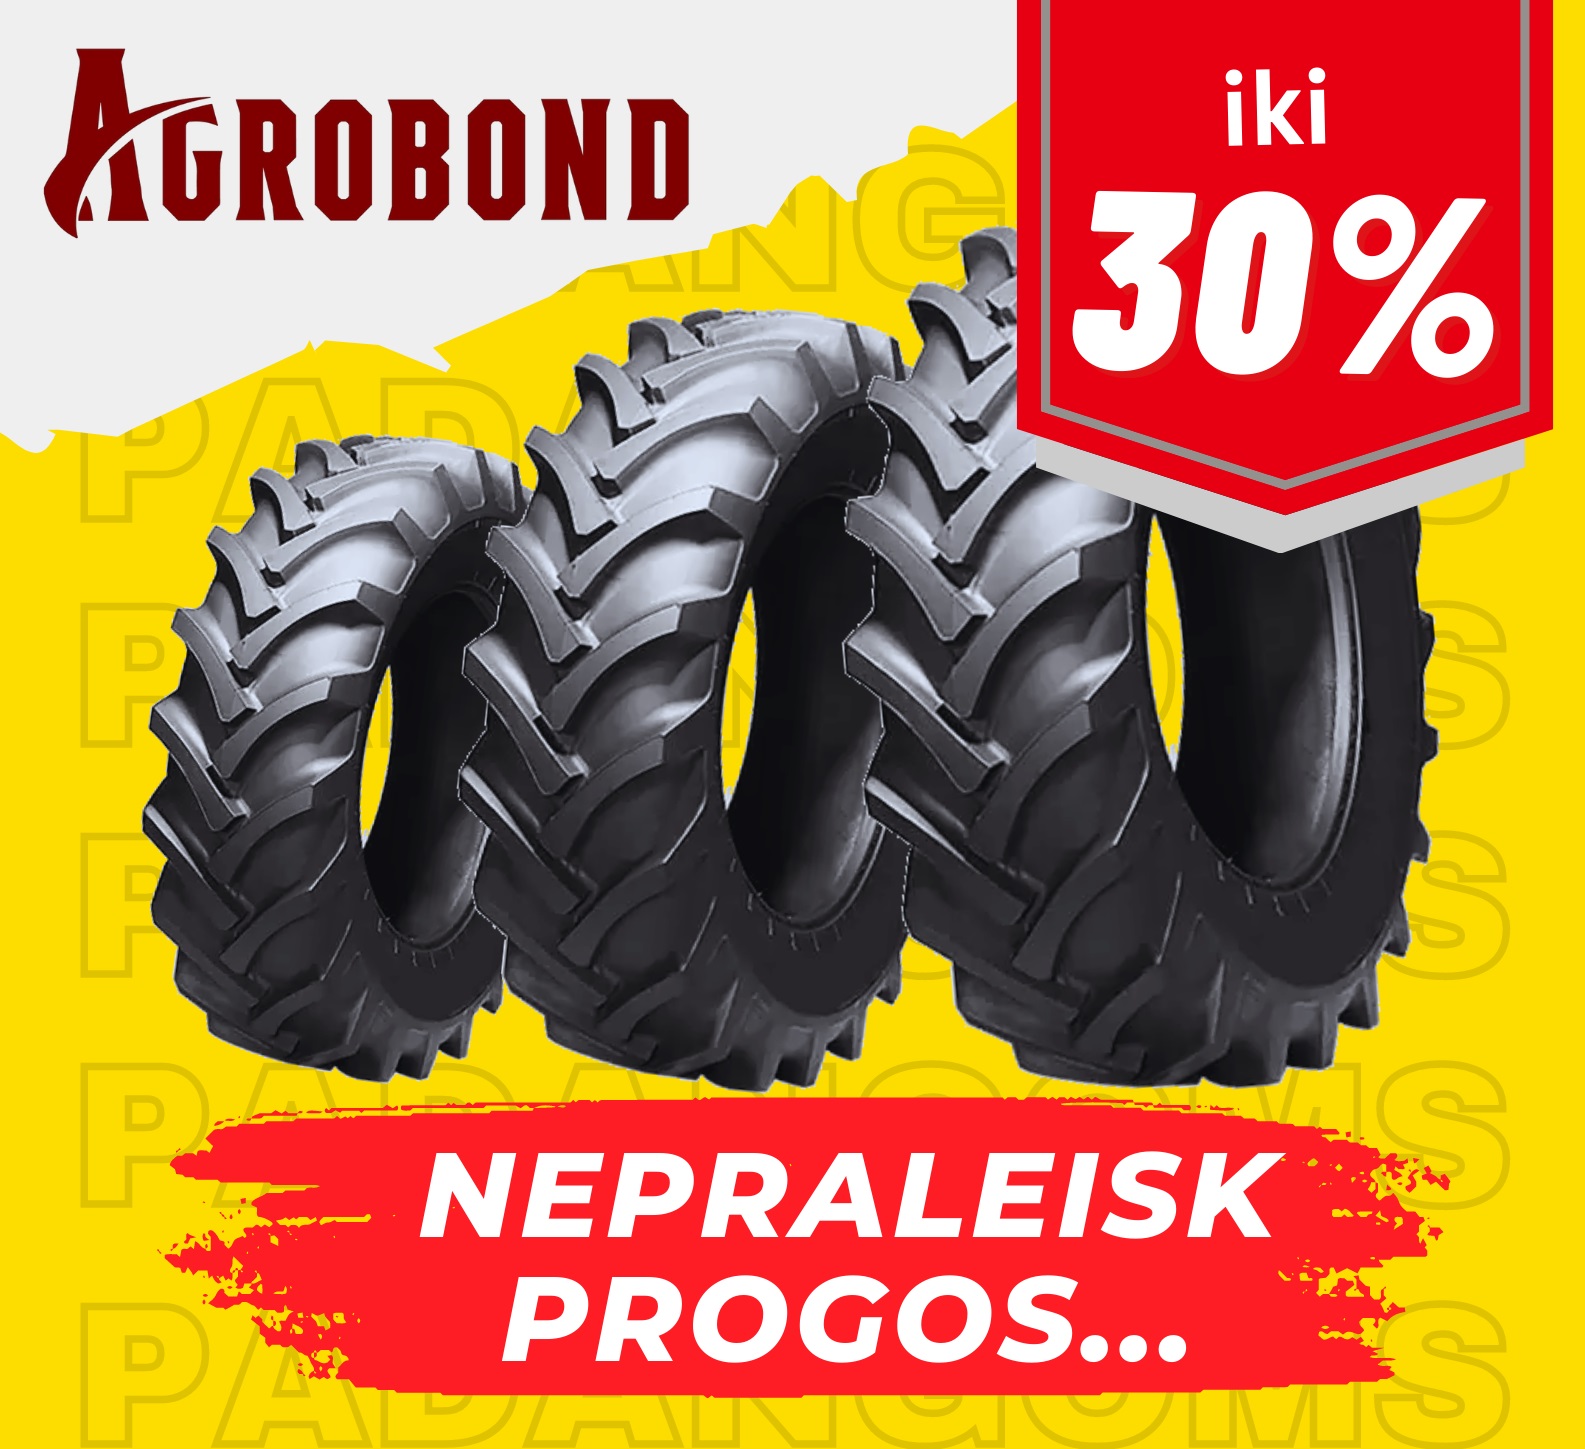 Tractor tires - discount up to 30%